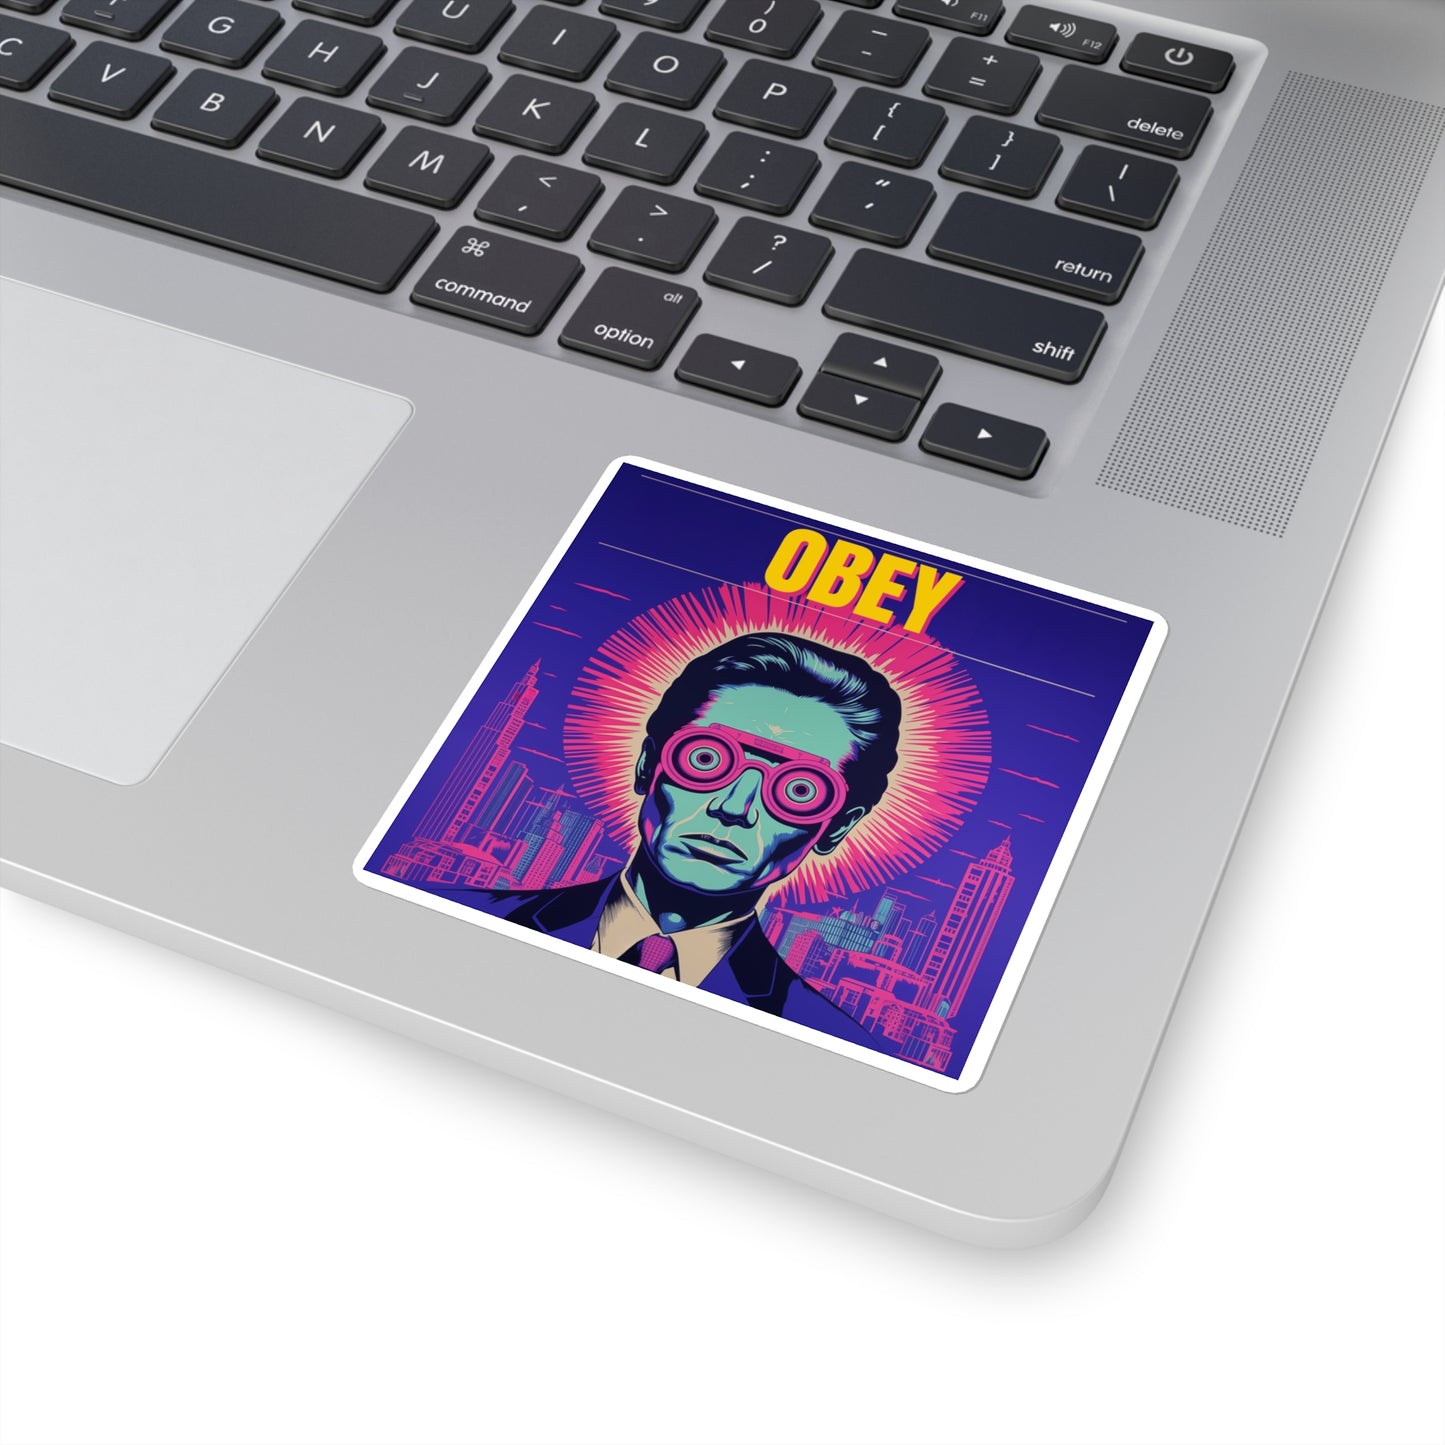 OBEY Square Stickers